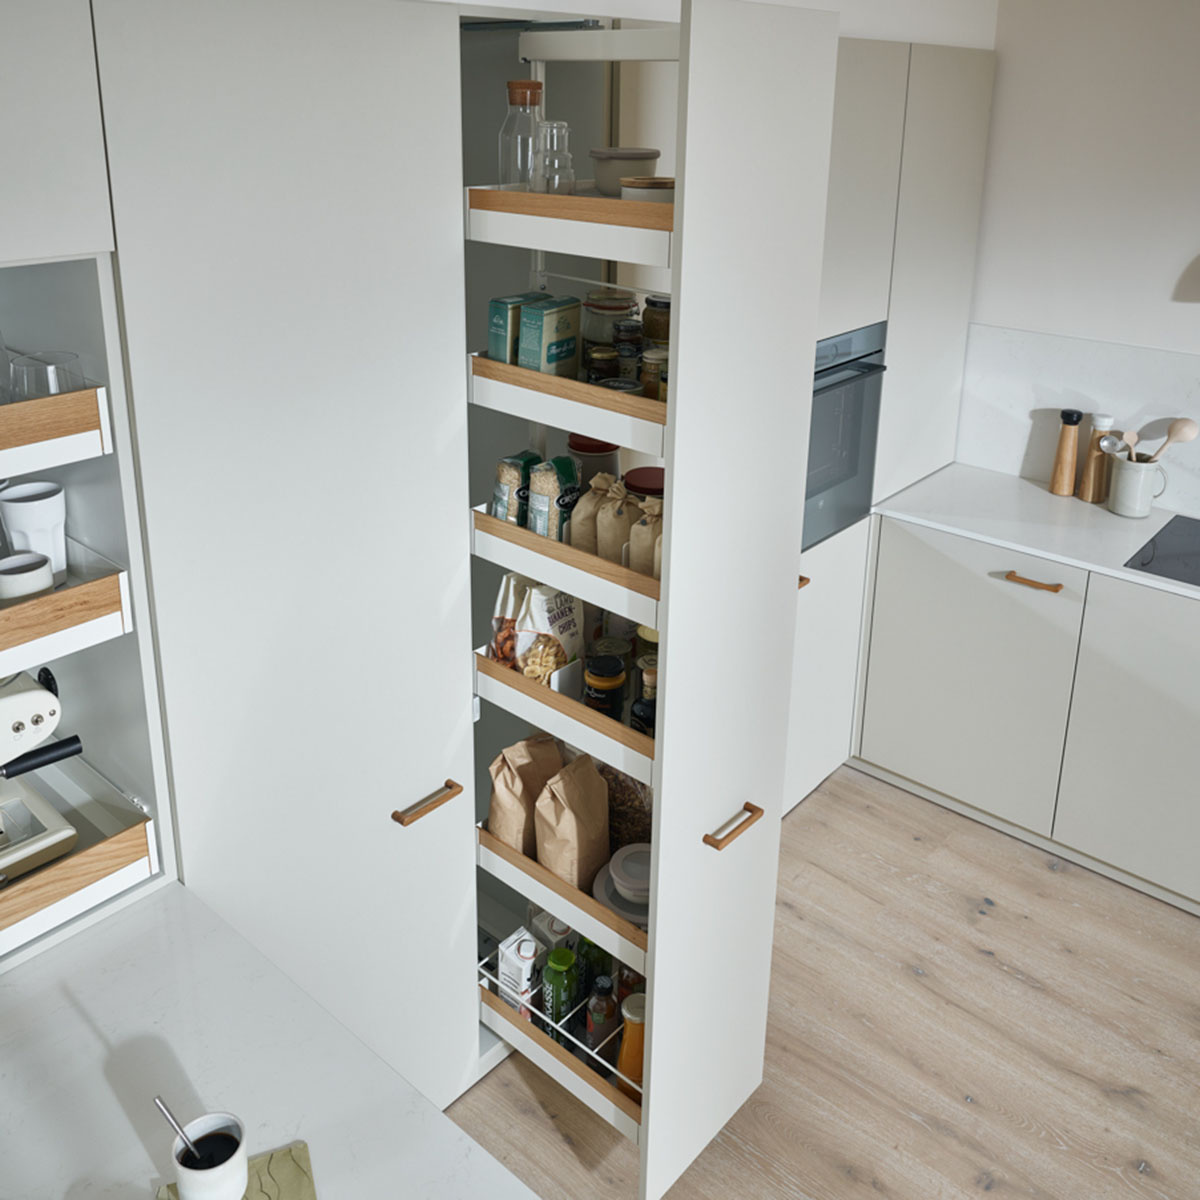 peka-metall AG – Innovative fittings for furniture and kitchens